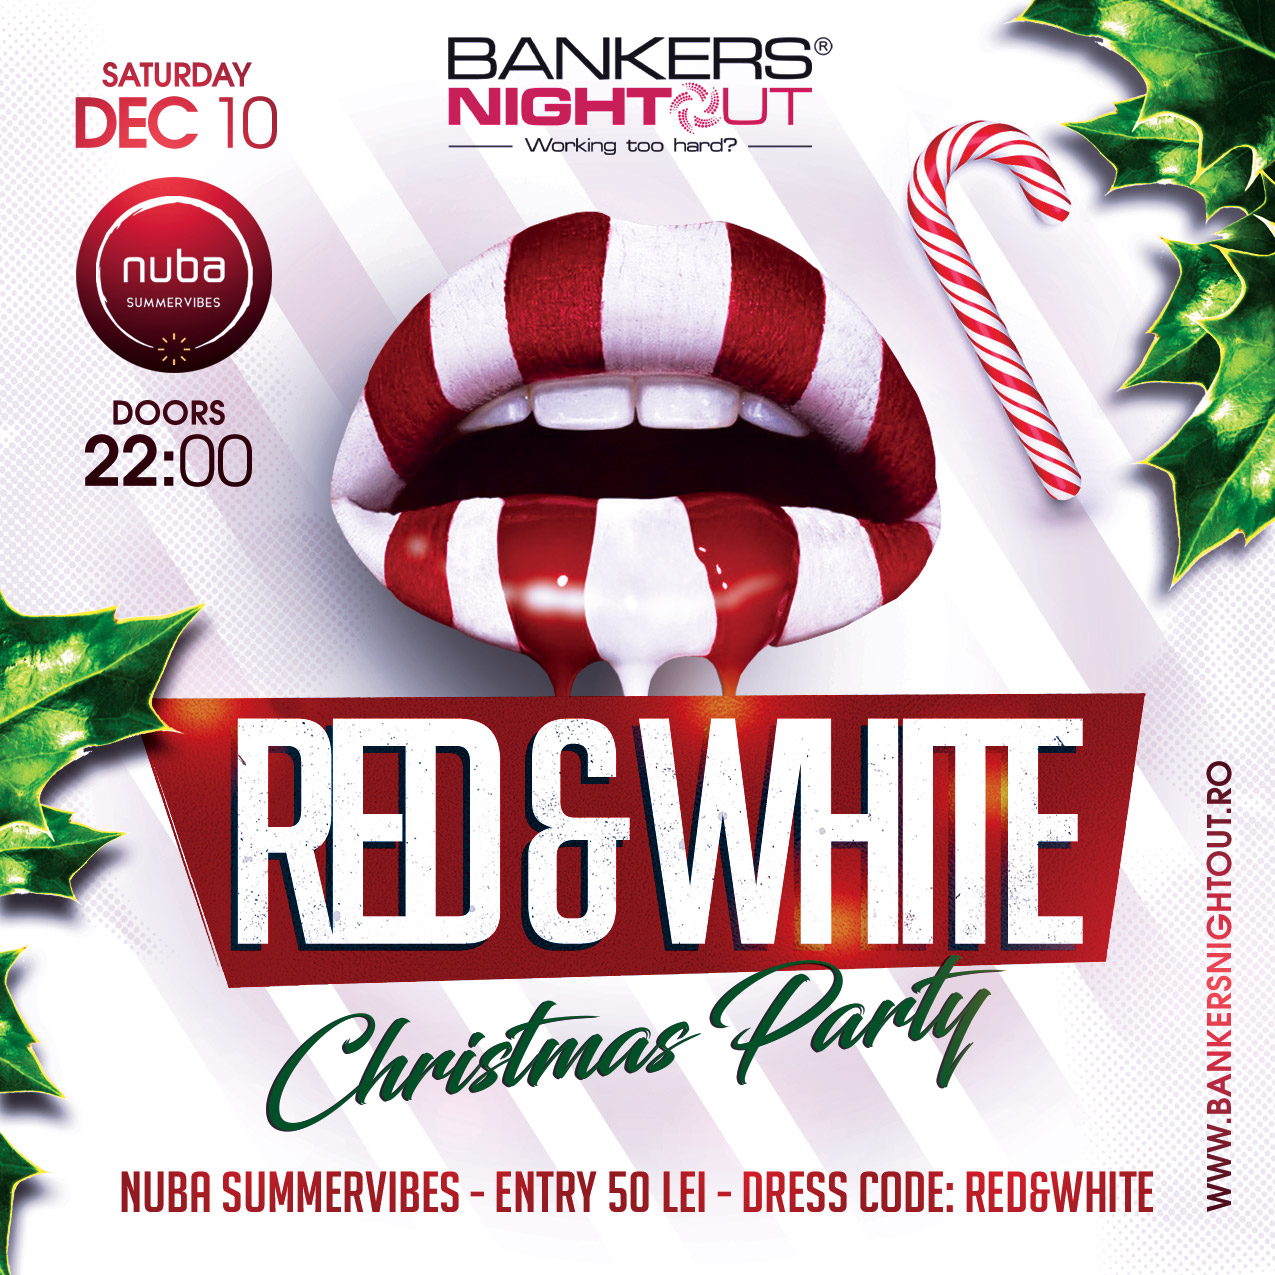 Bankers Night Out - Do you want to party with your friends from banking? Just dress in red & white and be there!